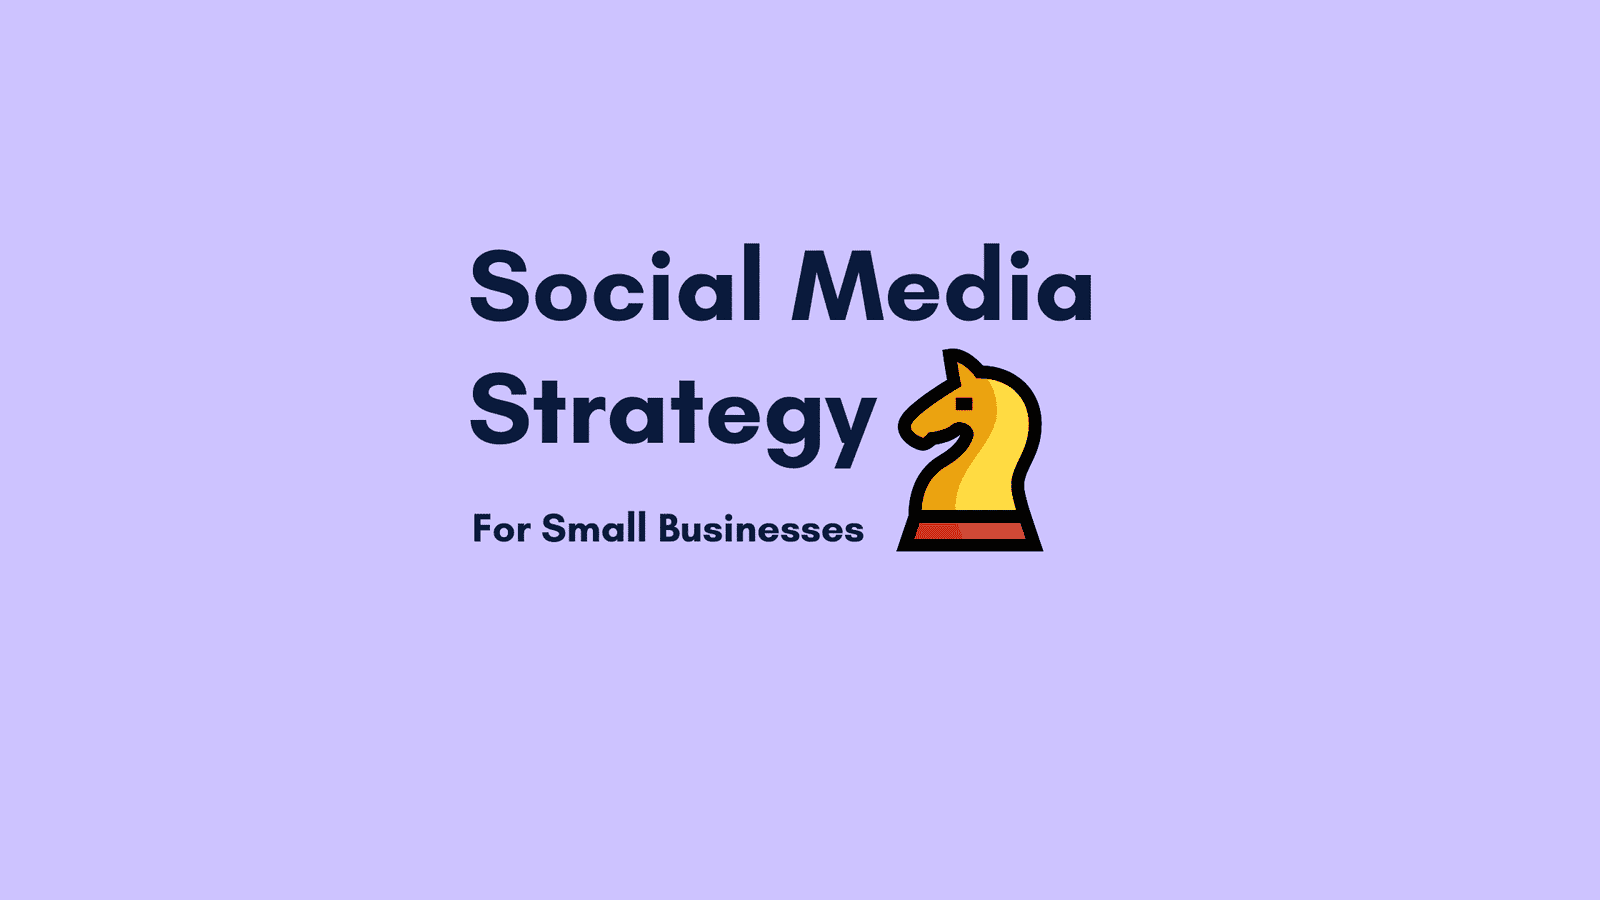 Social Media Strategy For Small Businesses